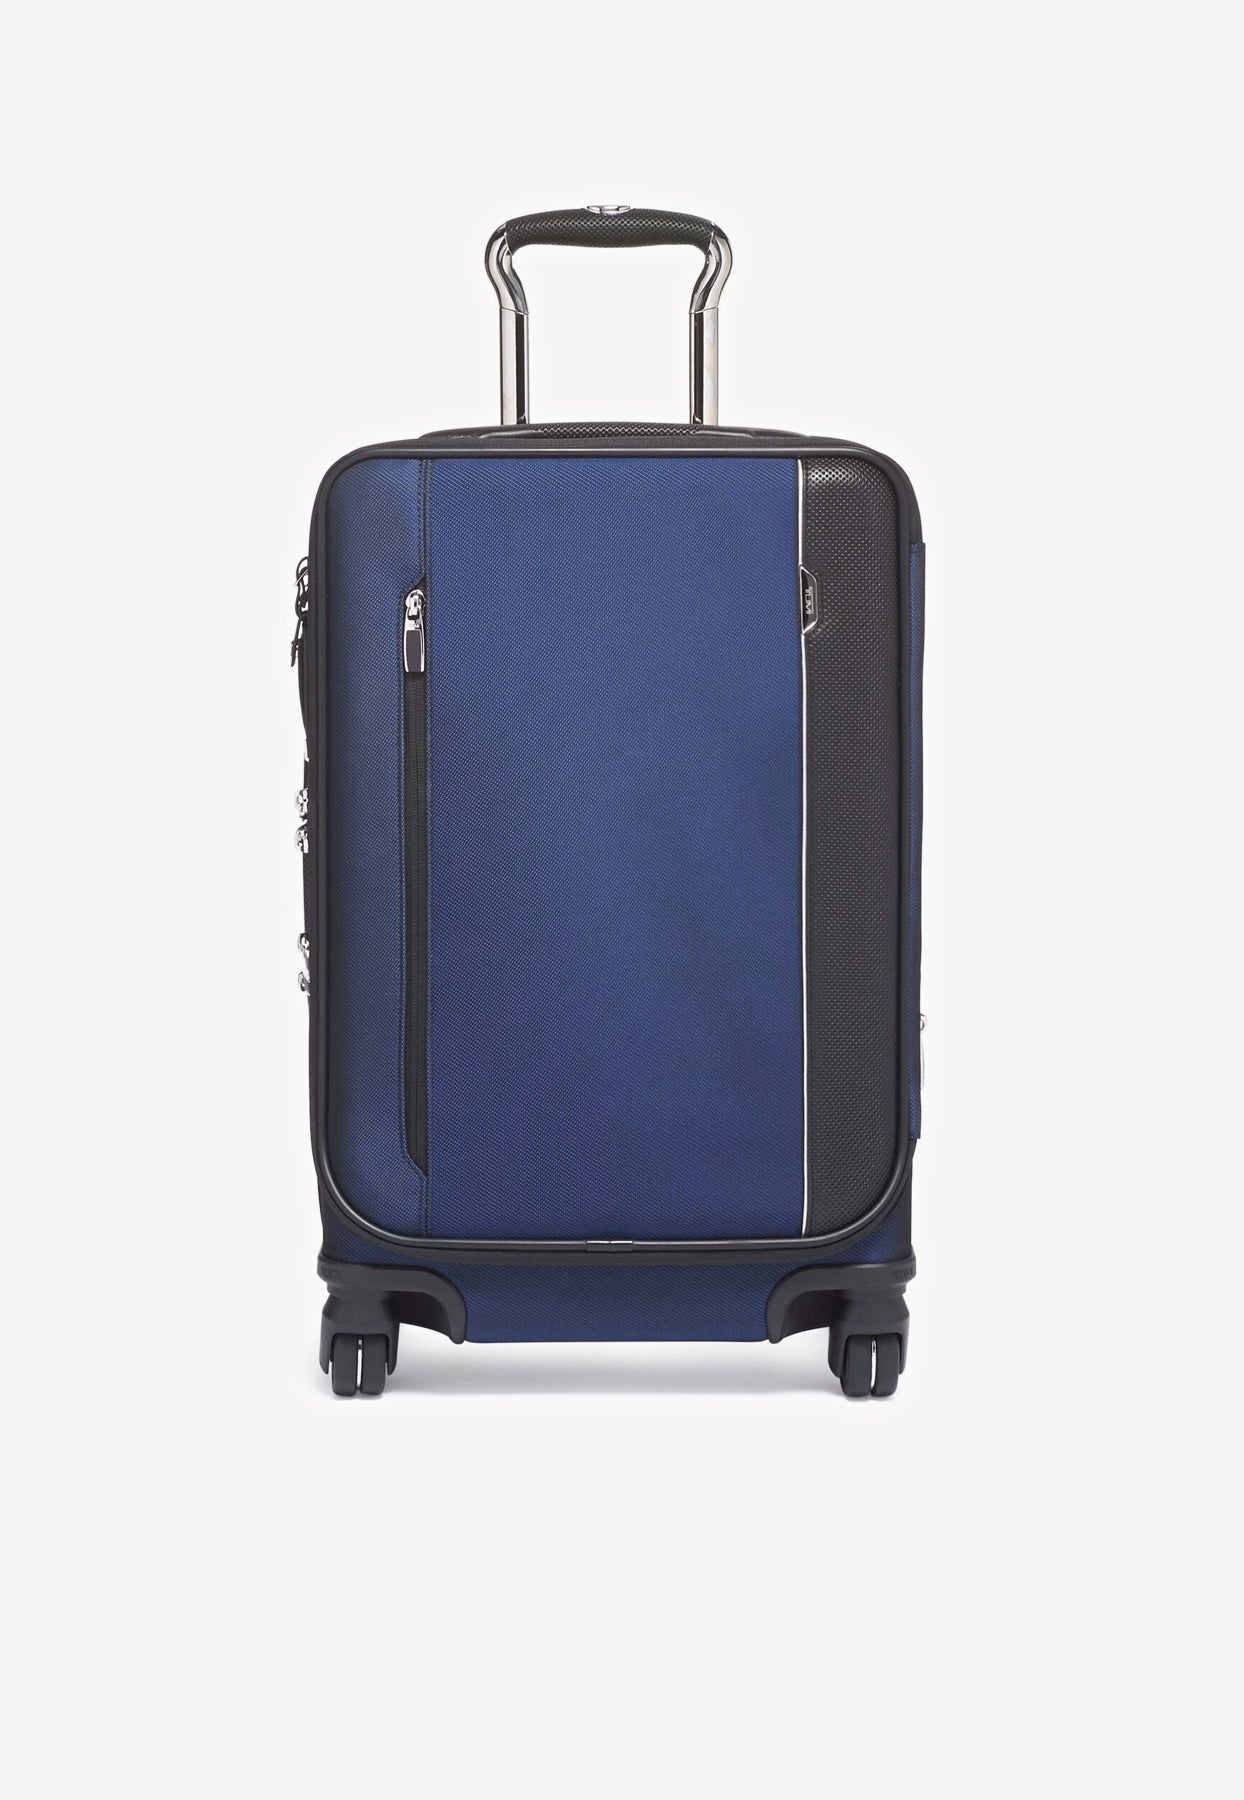 TUMI ARRIVE' INTERNATIONAL DUAL ACCESS 4-WHEELED CARRY-ON SPINNER LUGGAGE